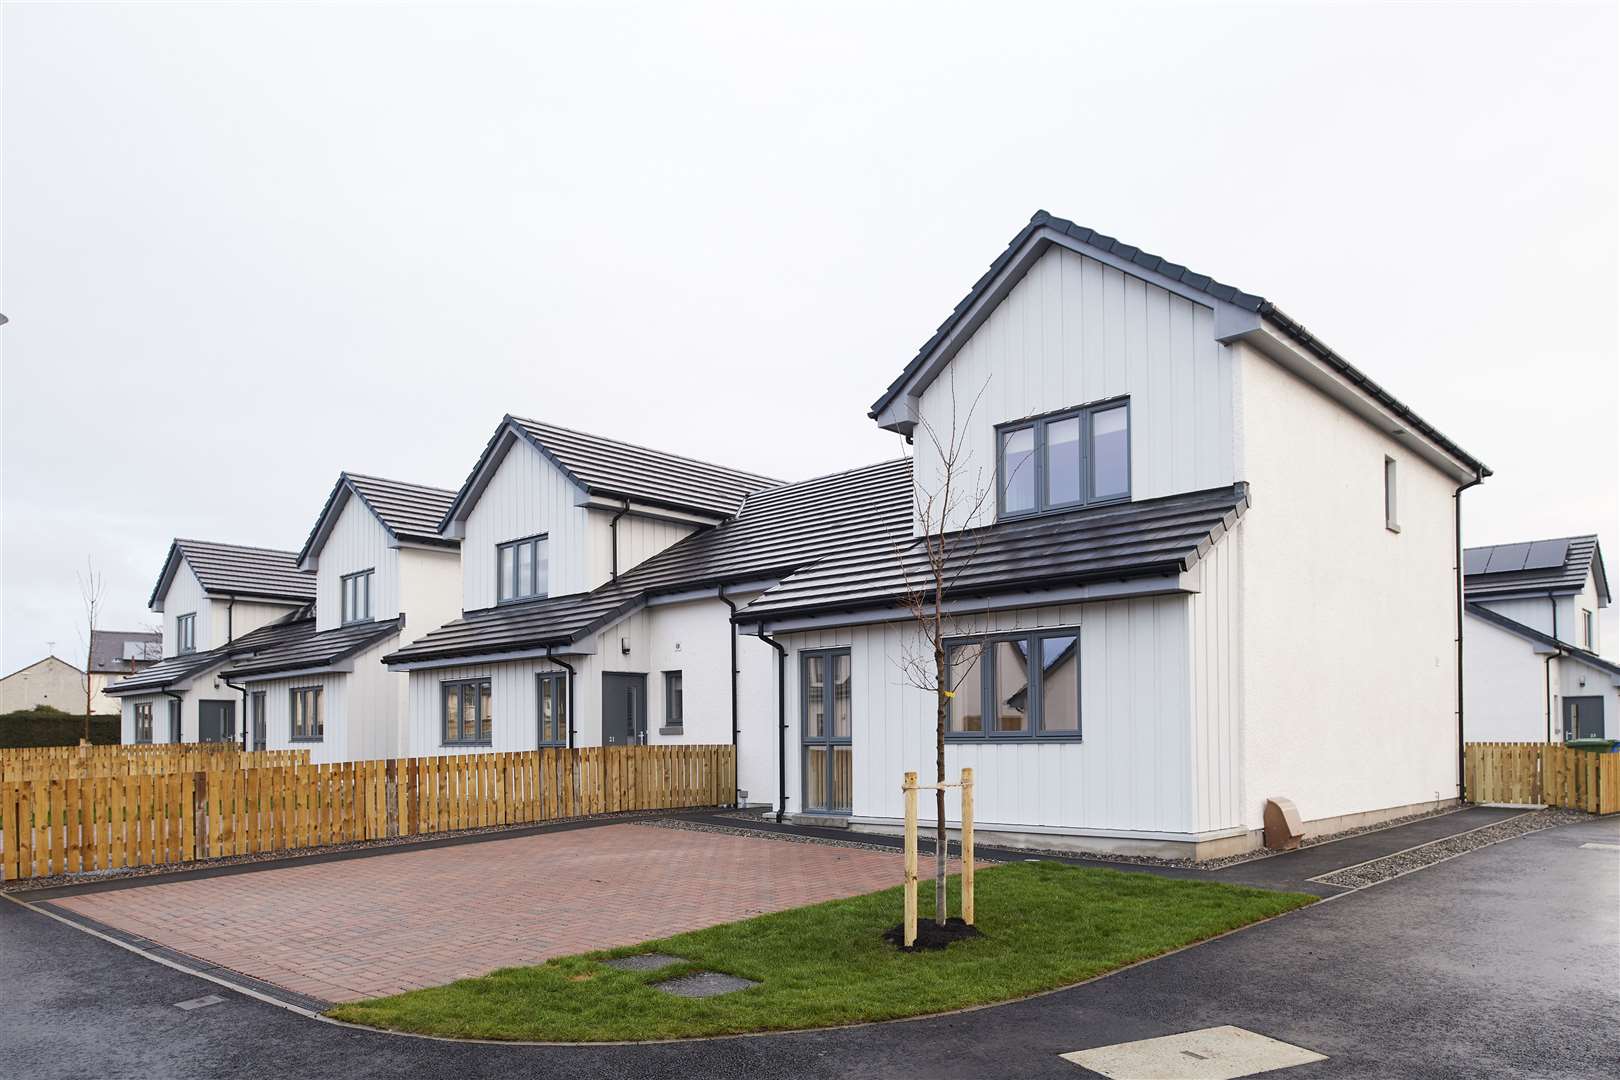 One of Highland Housing Alliance’s innovative, award-nominated homes at the formerly derelict Glendoe Terrace in Inverness.